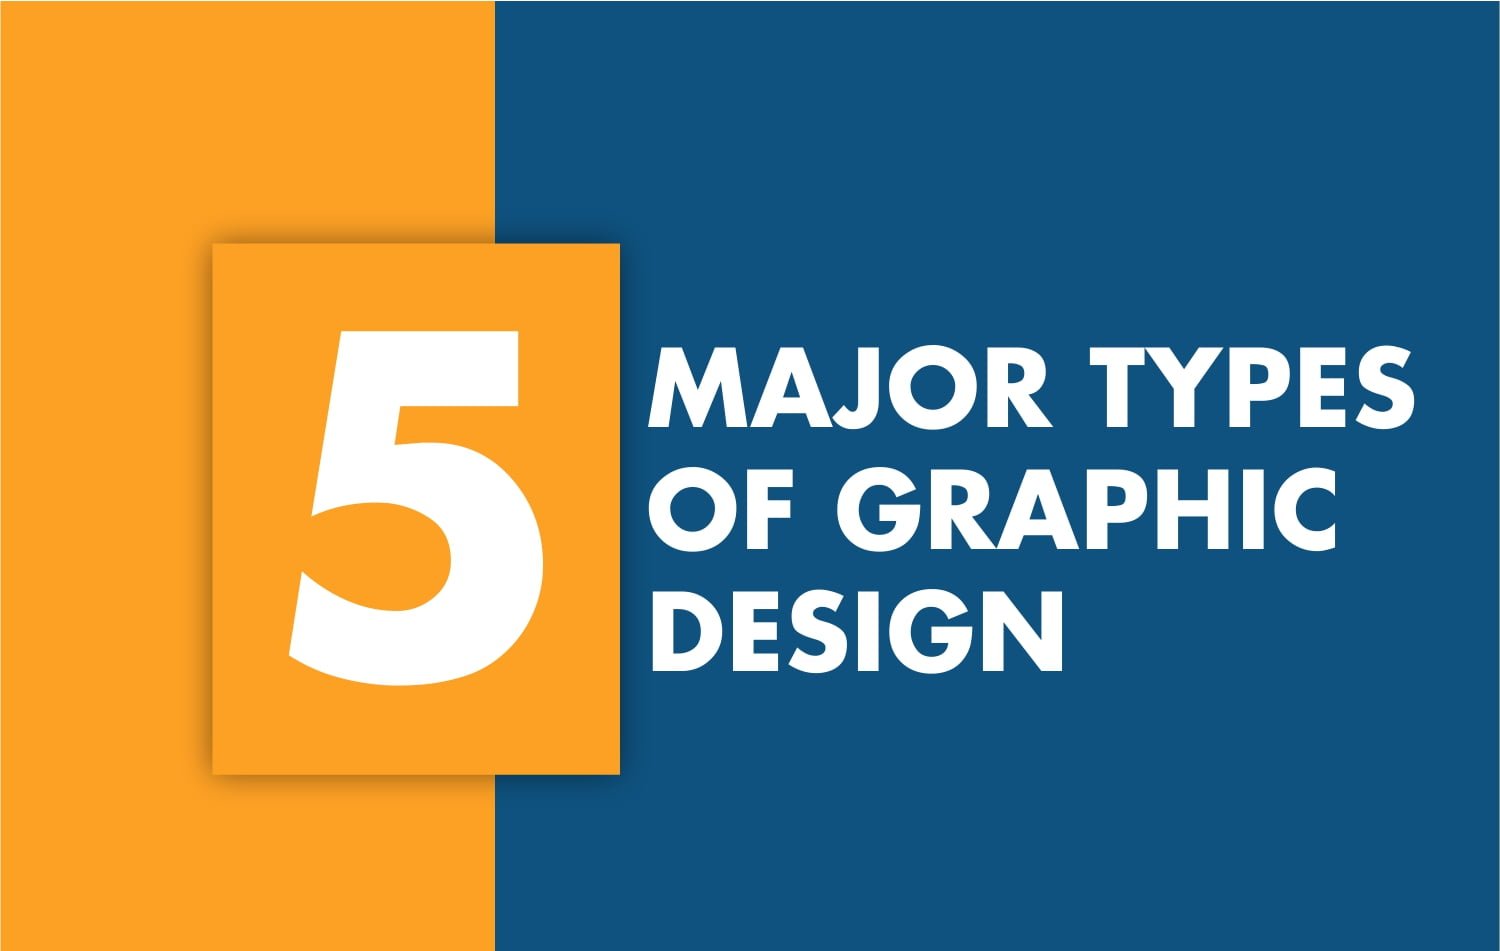 The 5 Major Types of Graphic Design